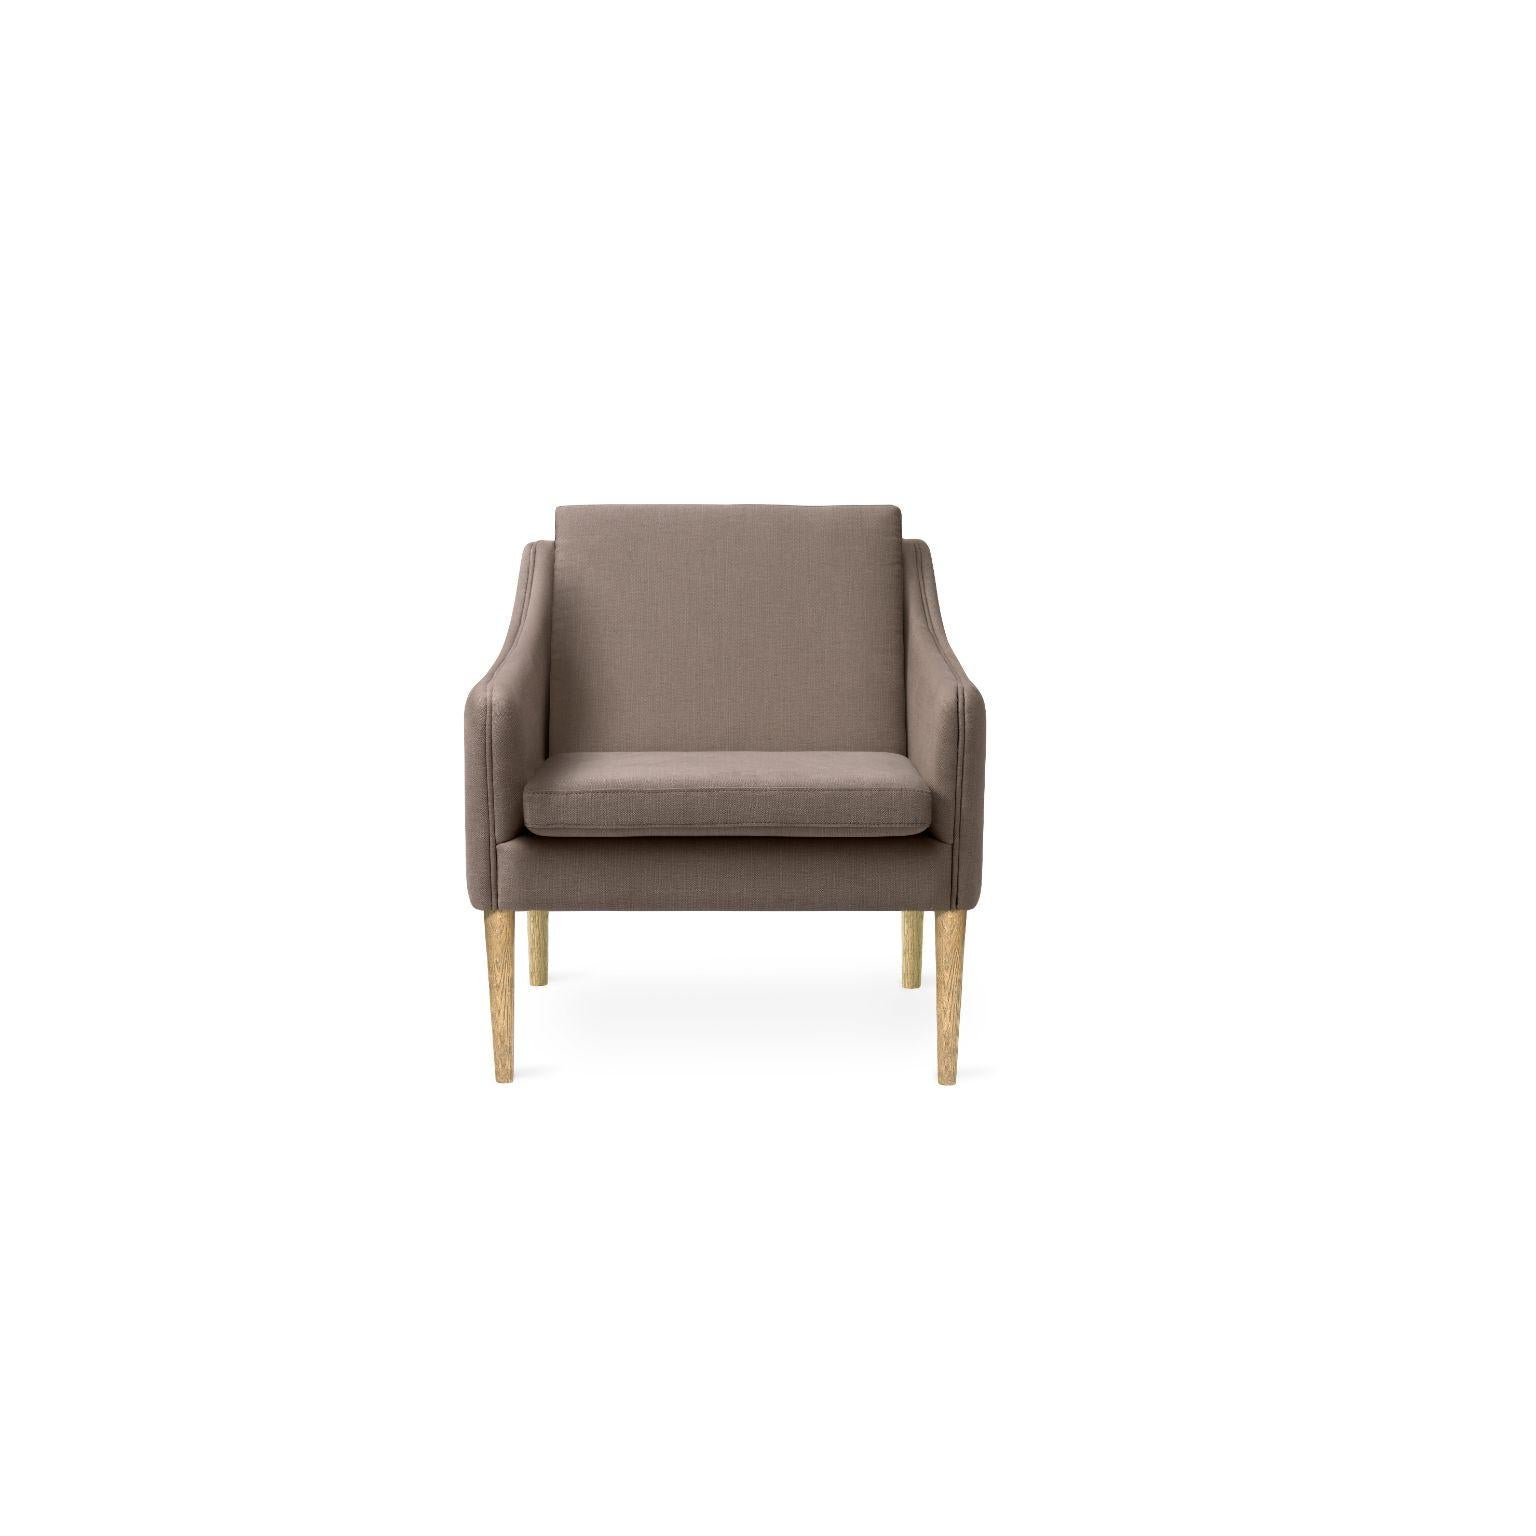 Mr. Olsen lounge chair solid smoked oak broken grey by Warm Nordic
Dimensions: D81 x W79 x H 78 cm
Material: Textile upholstery, Foam, Spring system, Oak
Weight: 27 kg
Also available in different colours, materials and finishes. 

A classic,